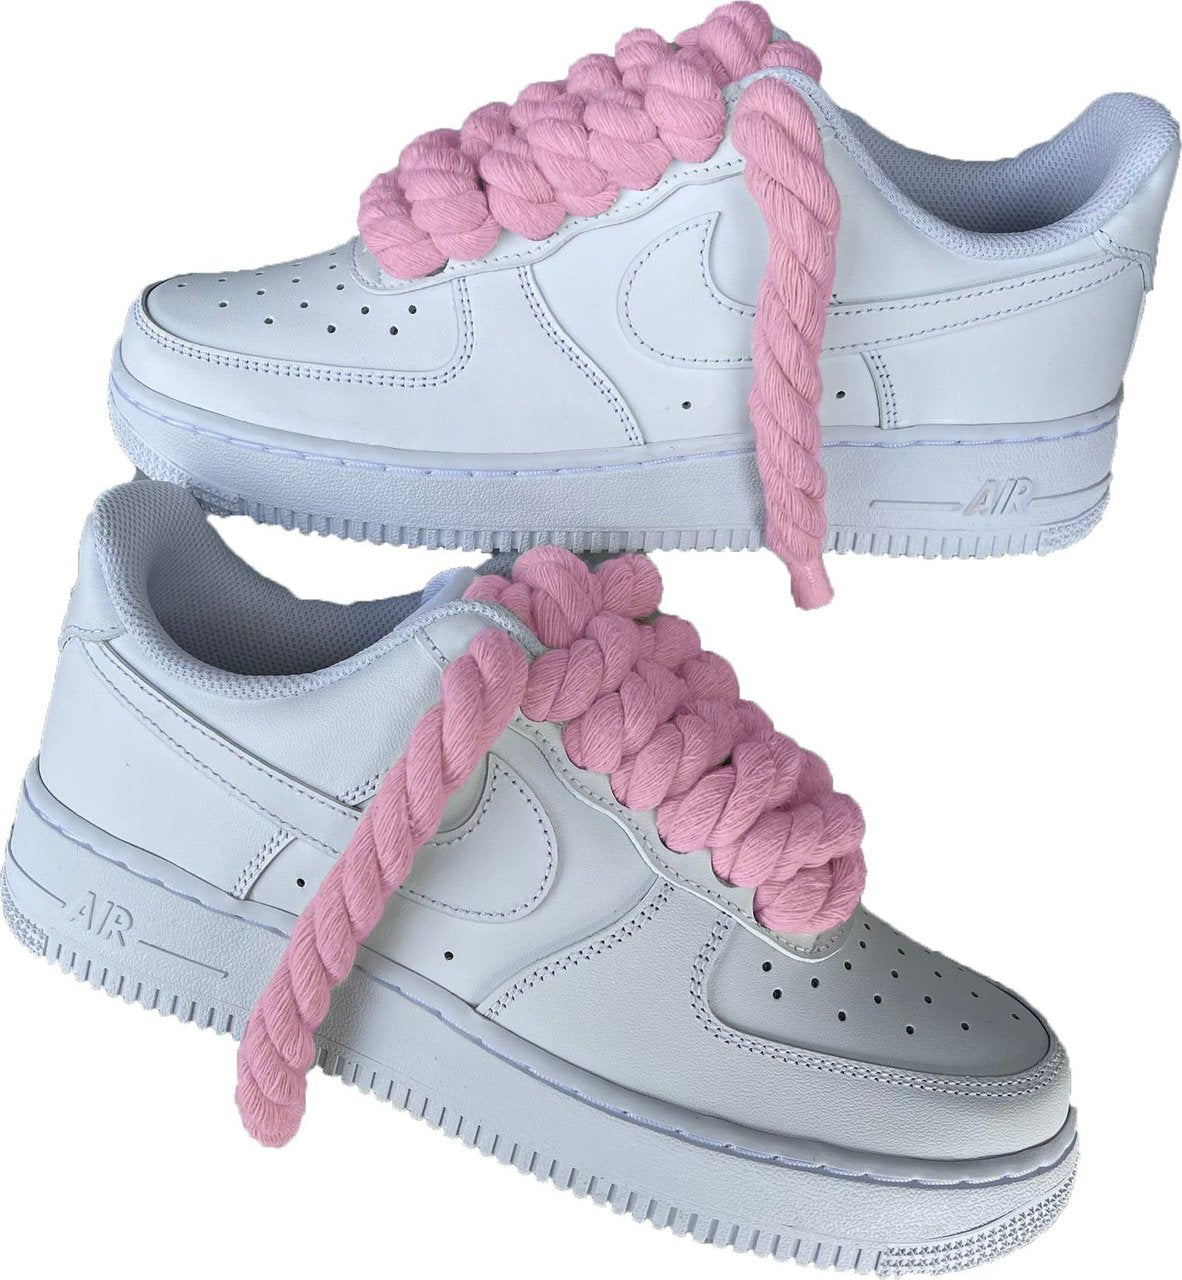 Air Force 1 Rope Laces pink - Snea.kersale